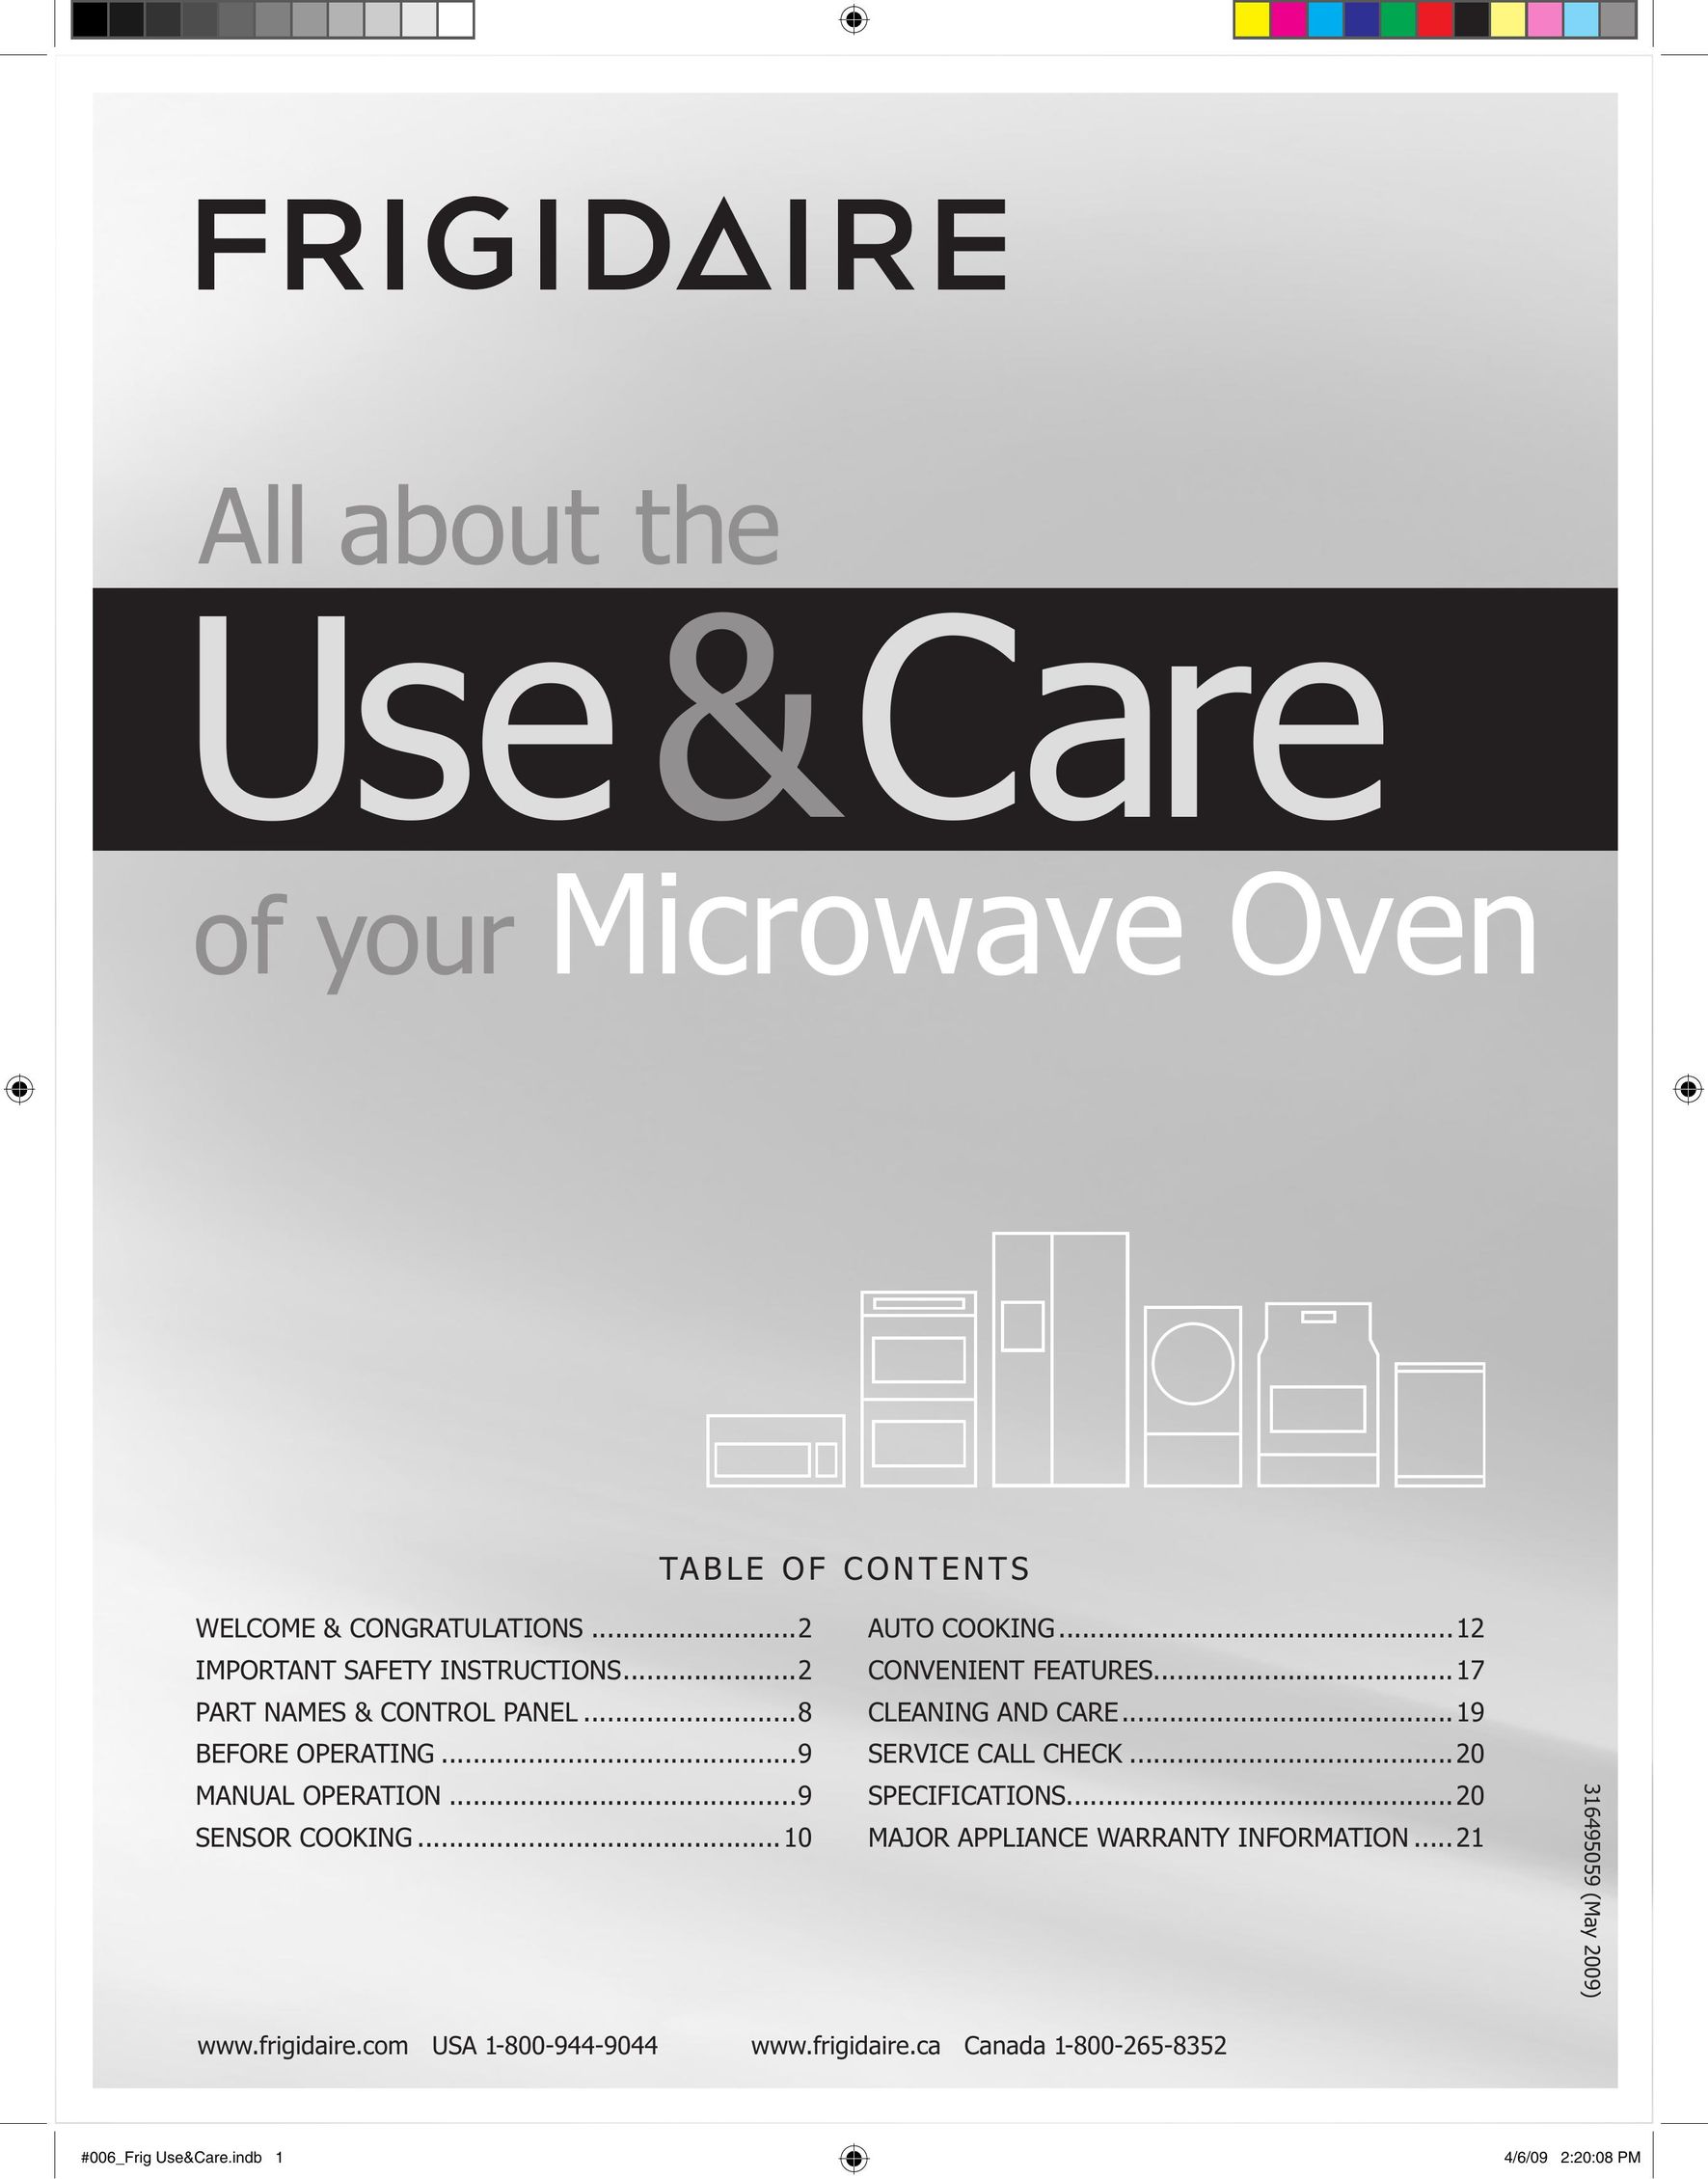 Frigidaire 316495059 Microwave Oven User Manual